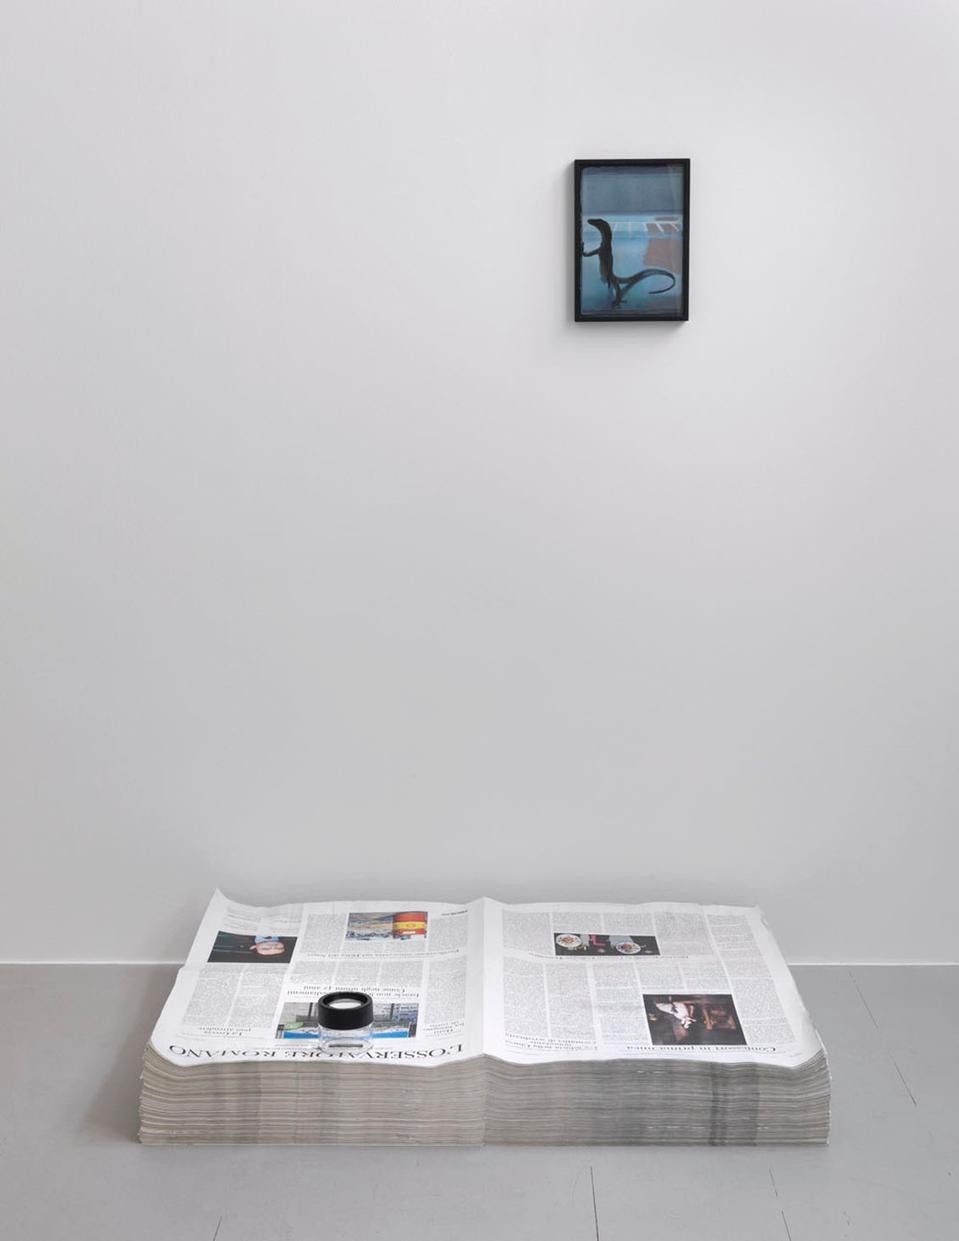 Pietro Roccasalva, <i>
(Unicuique Suum)</i>,  
2010. Stacked newspapers, magnifying glass, acrylic on paper.
